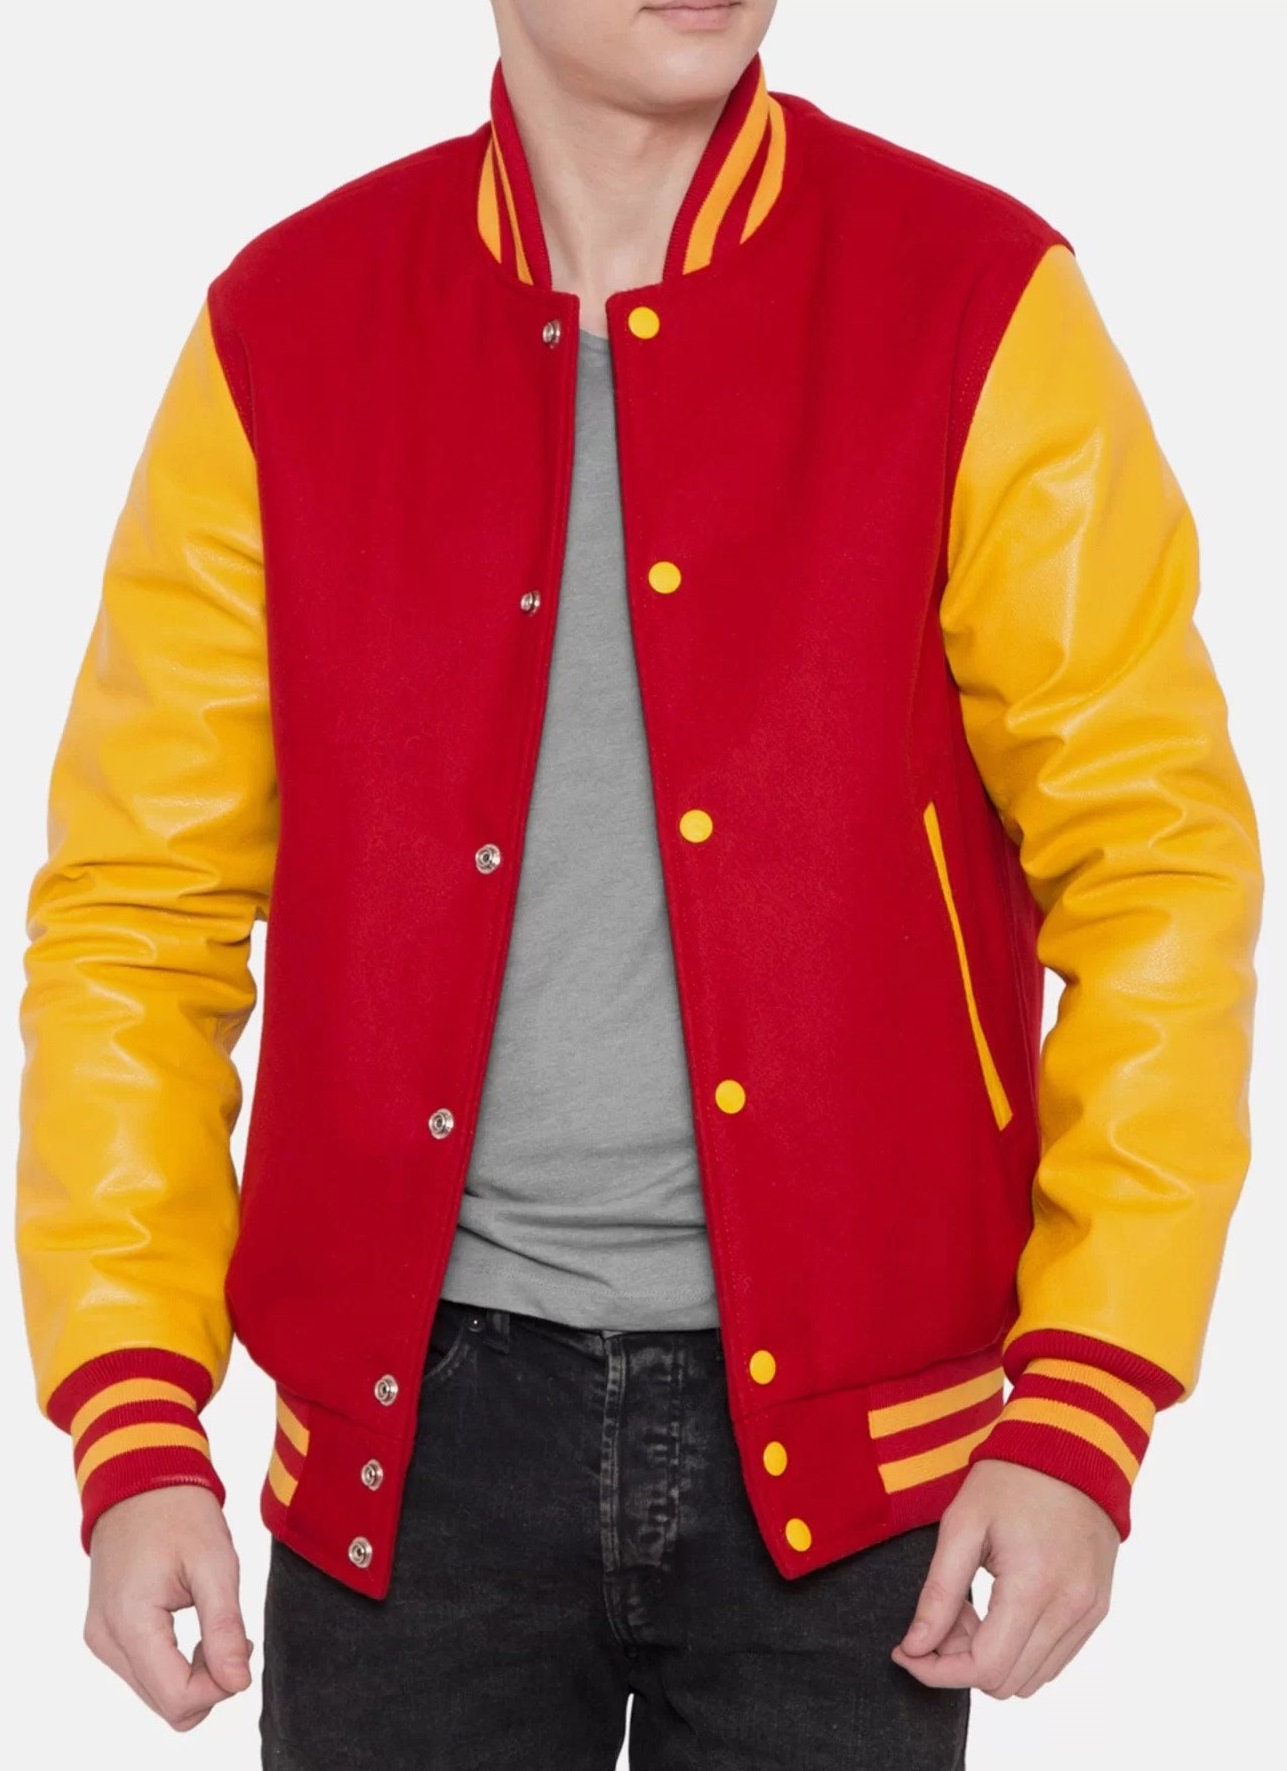 Mens Iconic Red and Yellow Varsity Jacket 